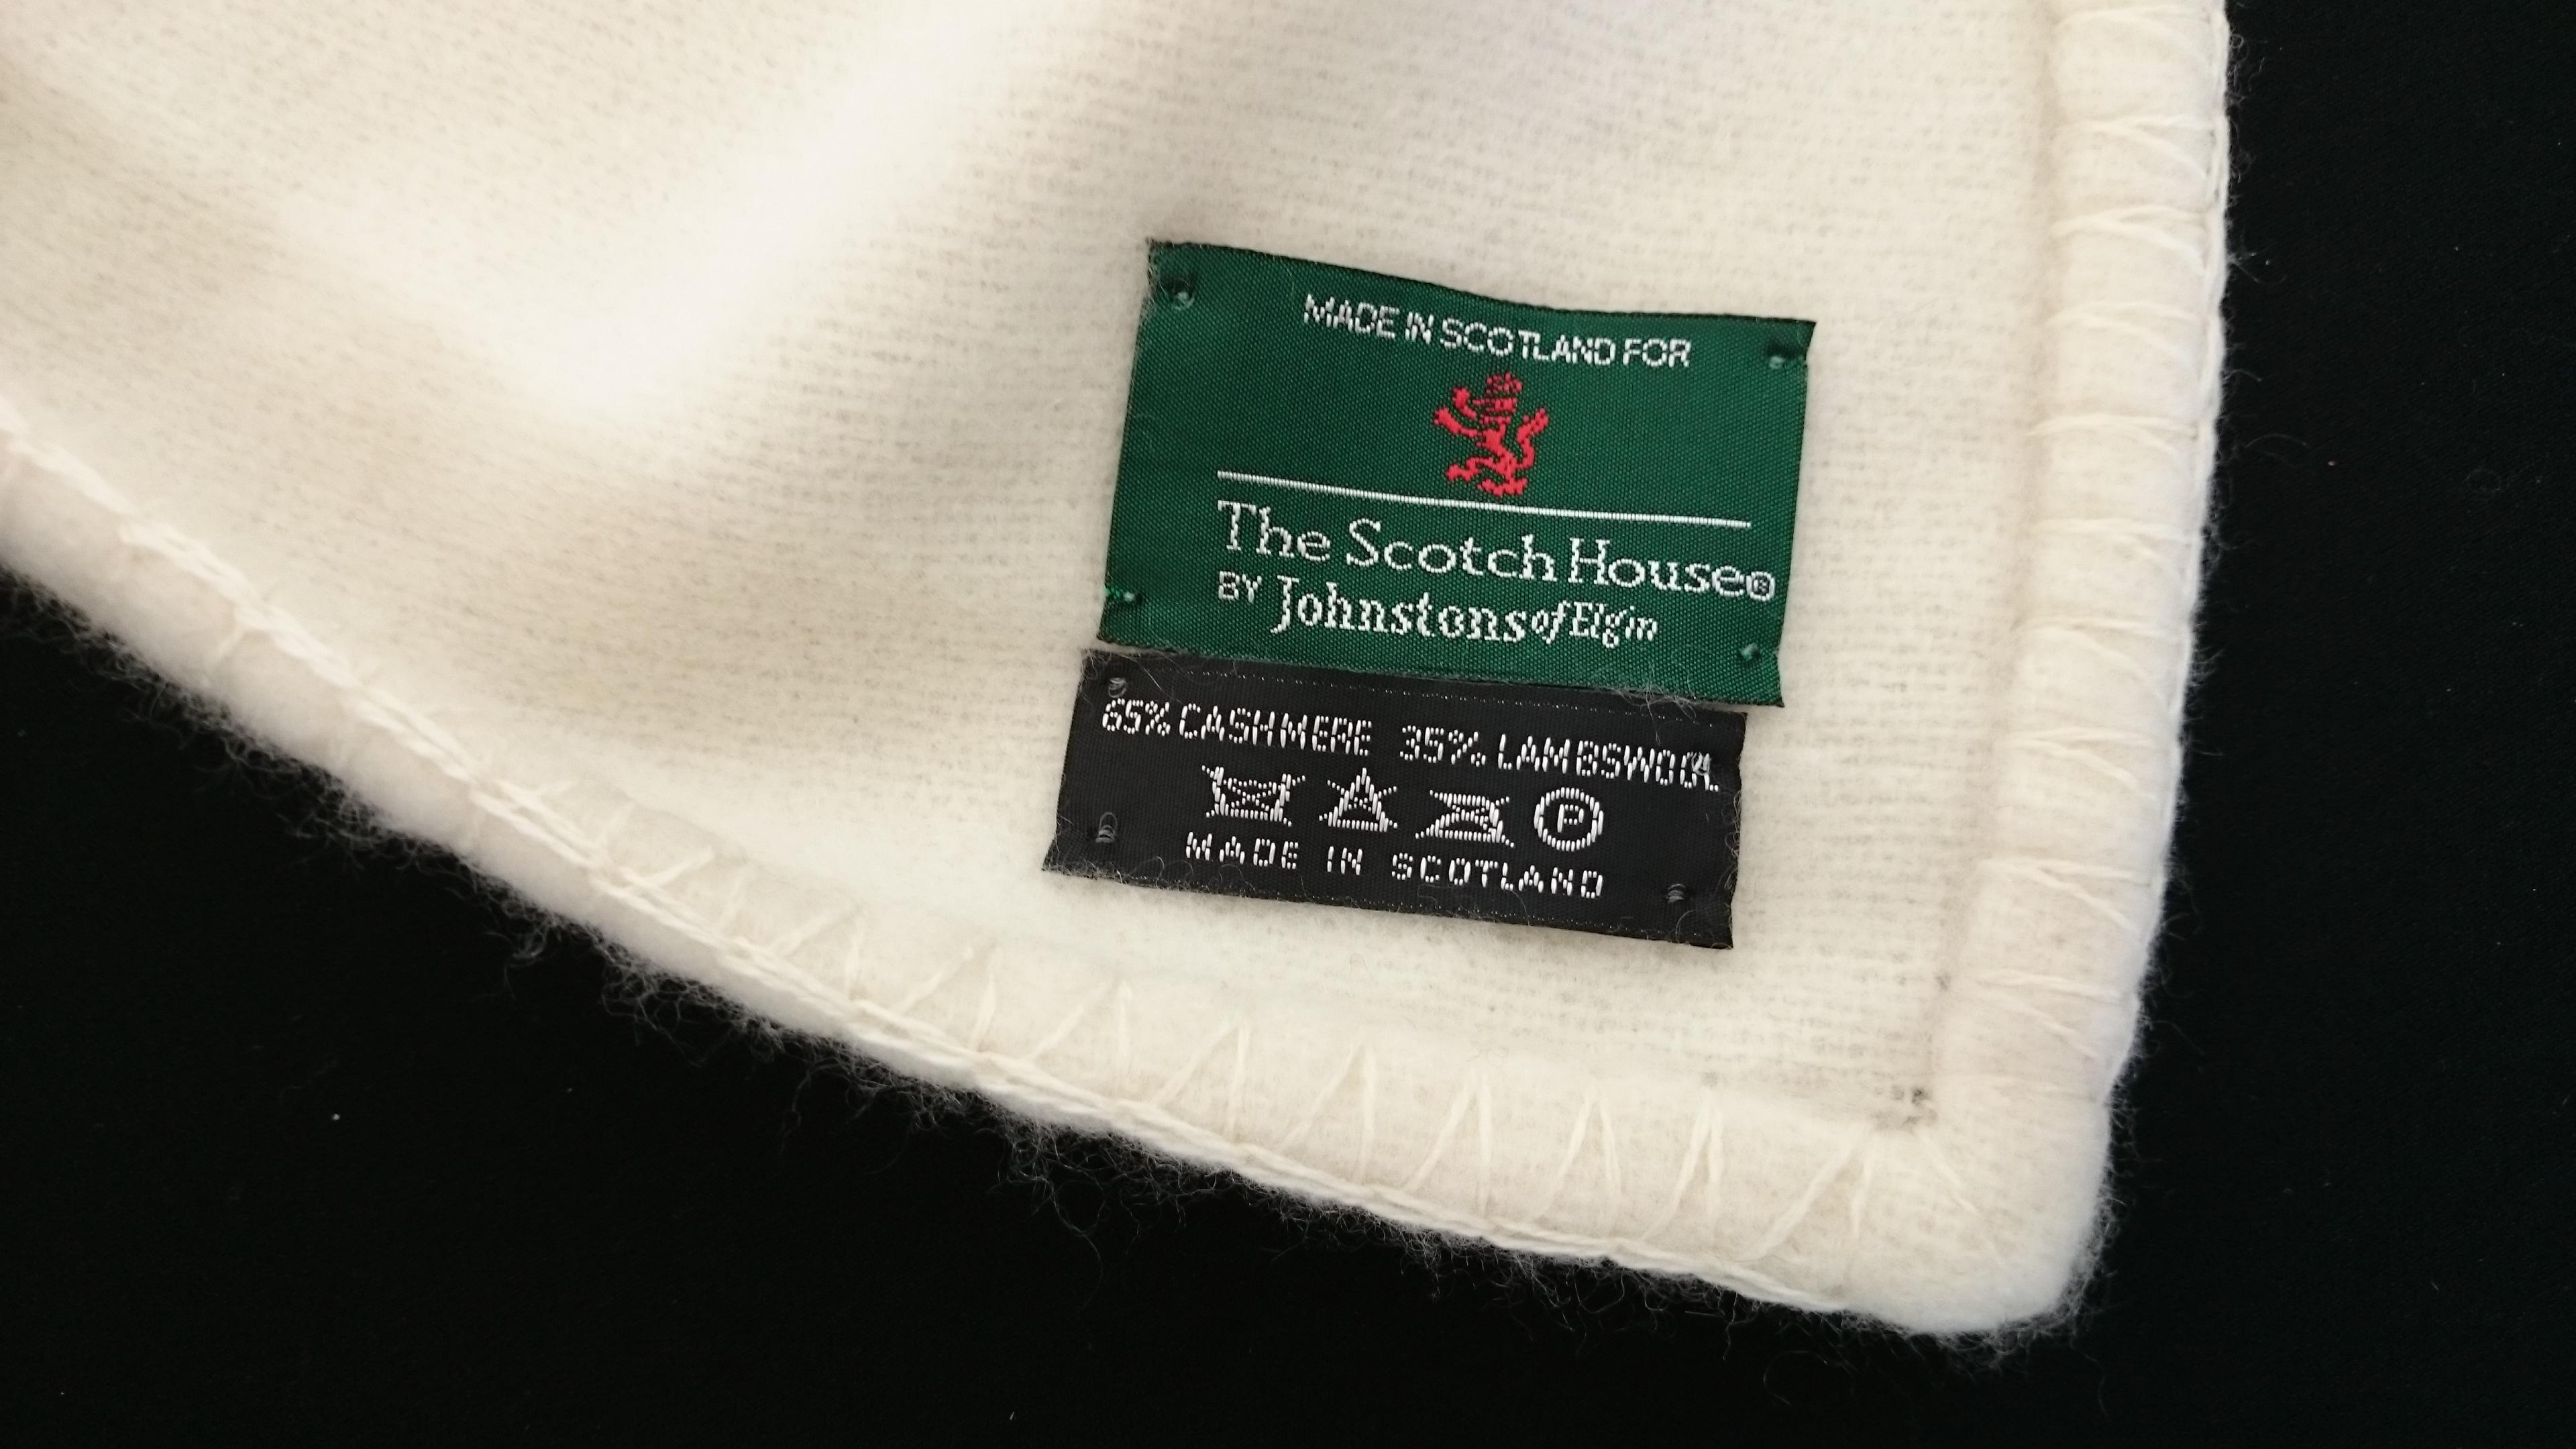 Gray Johnstons of Elgin Cashmere (65%) Blanket for The Scotch House For Sale